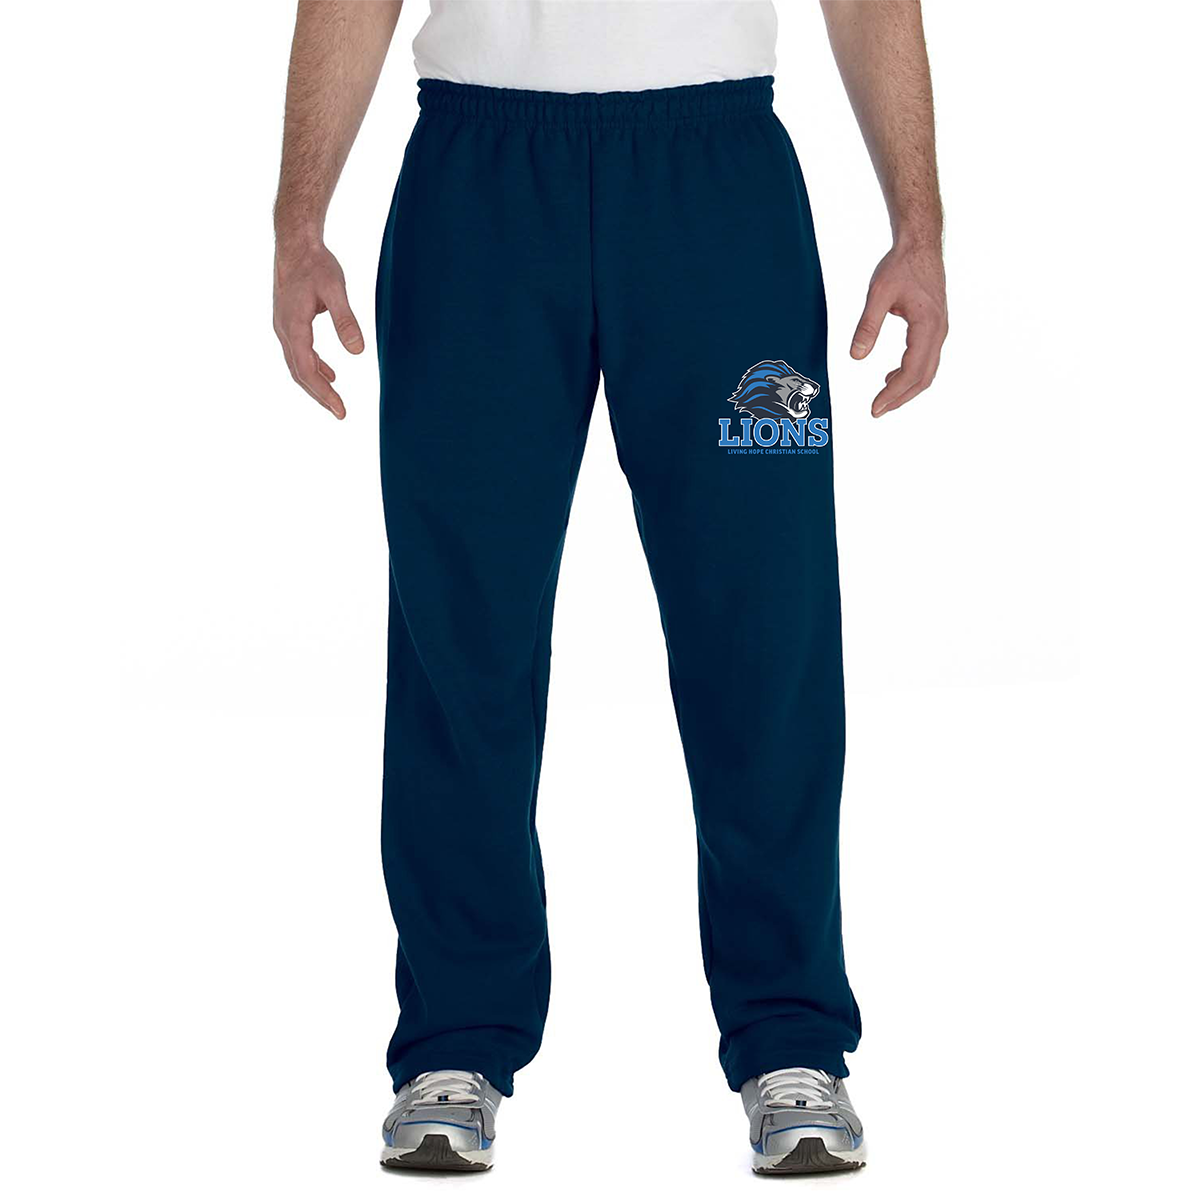 Adult Open Bottom Sweatpants with Pockets